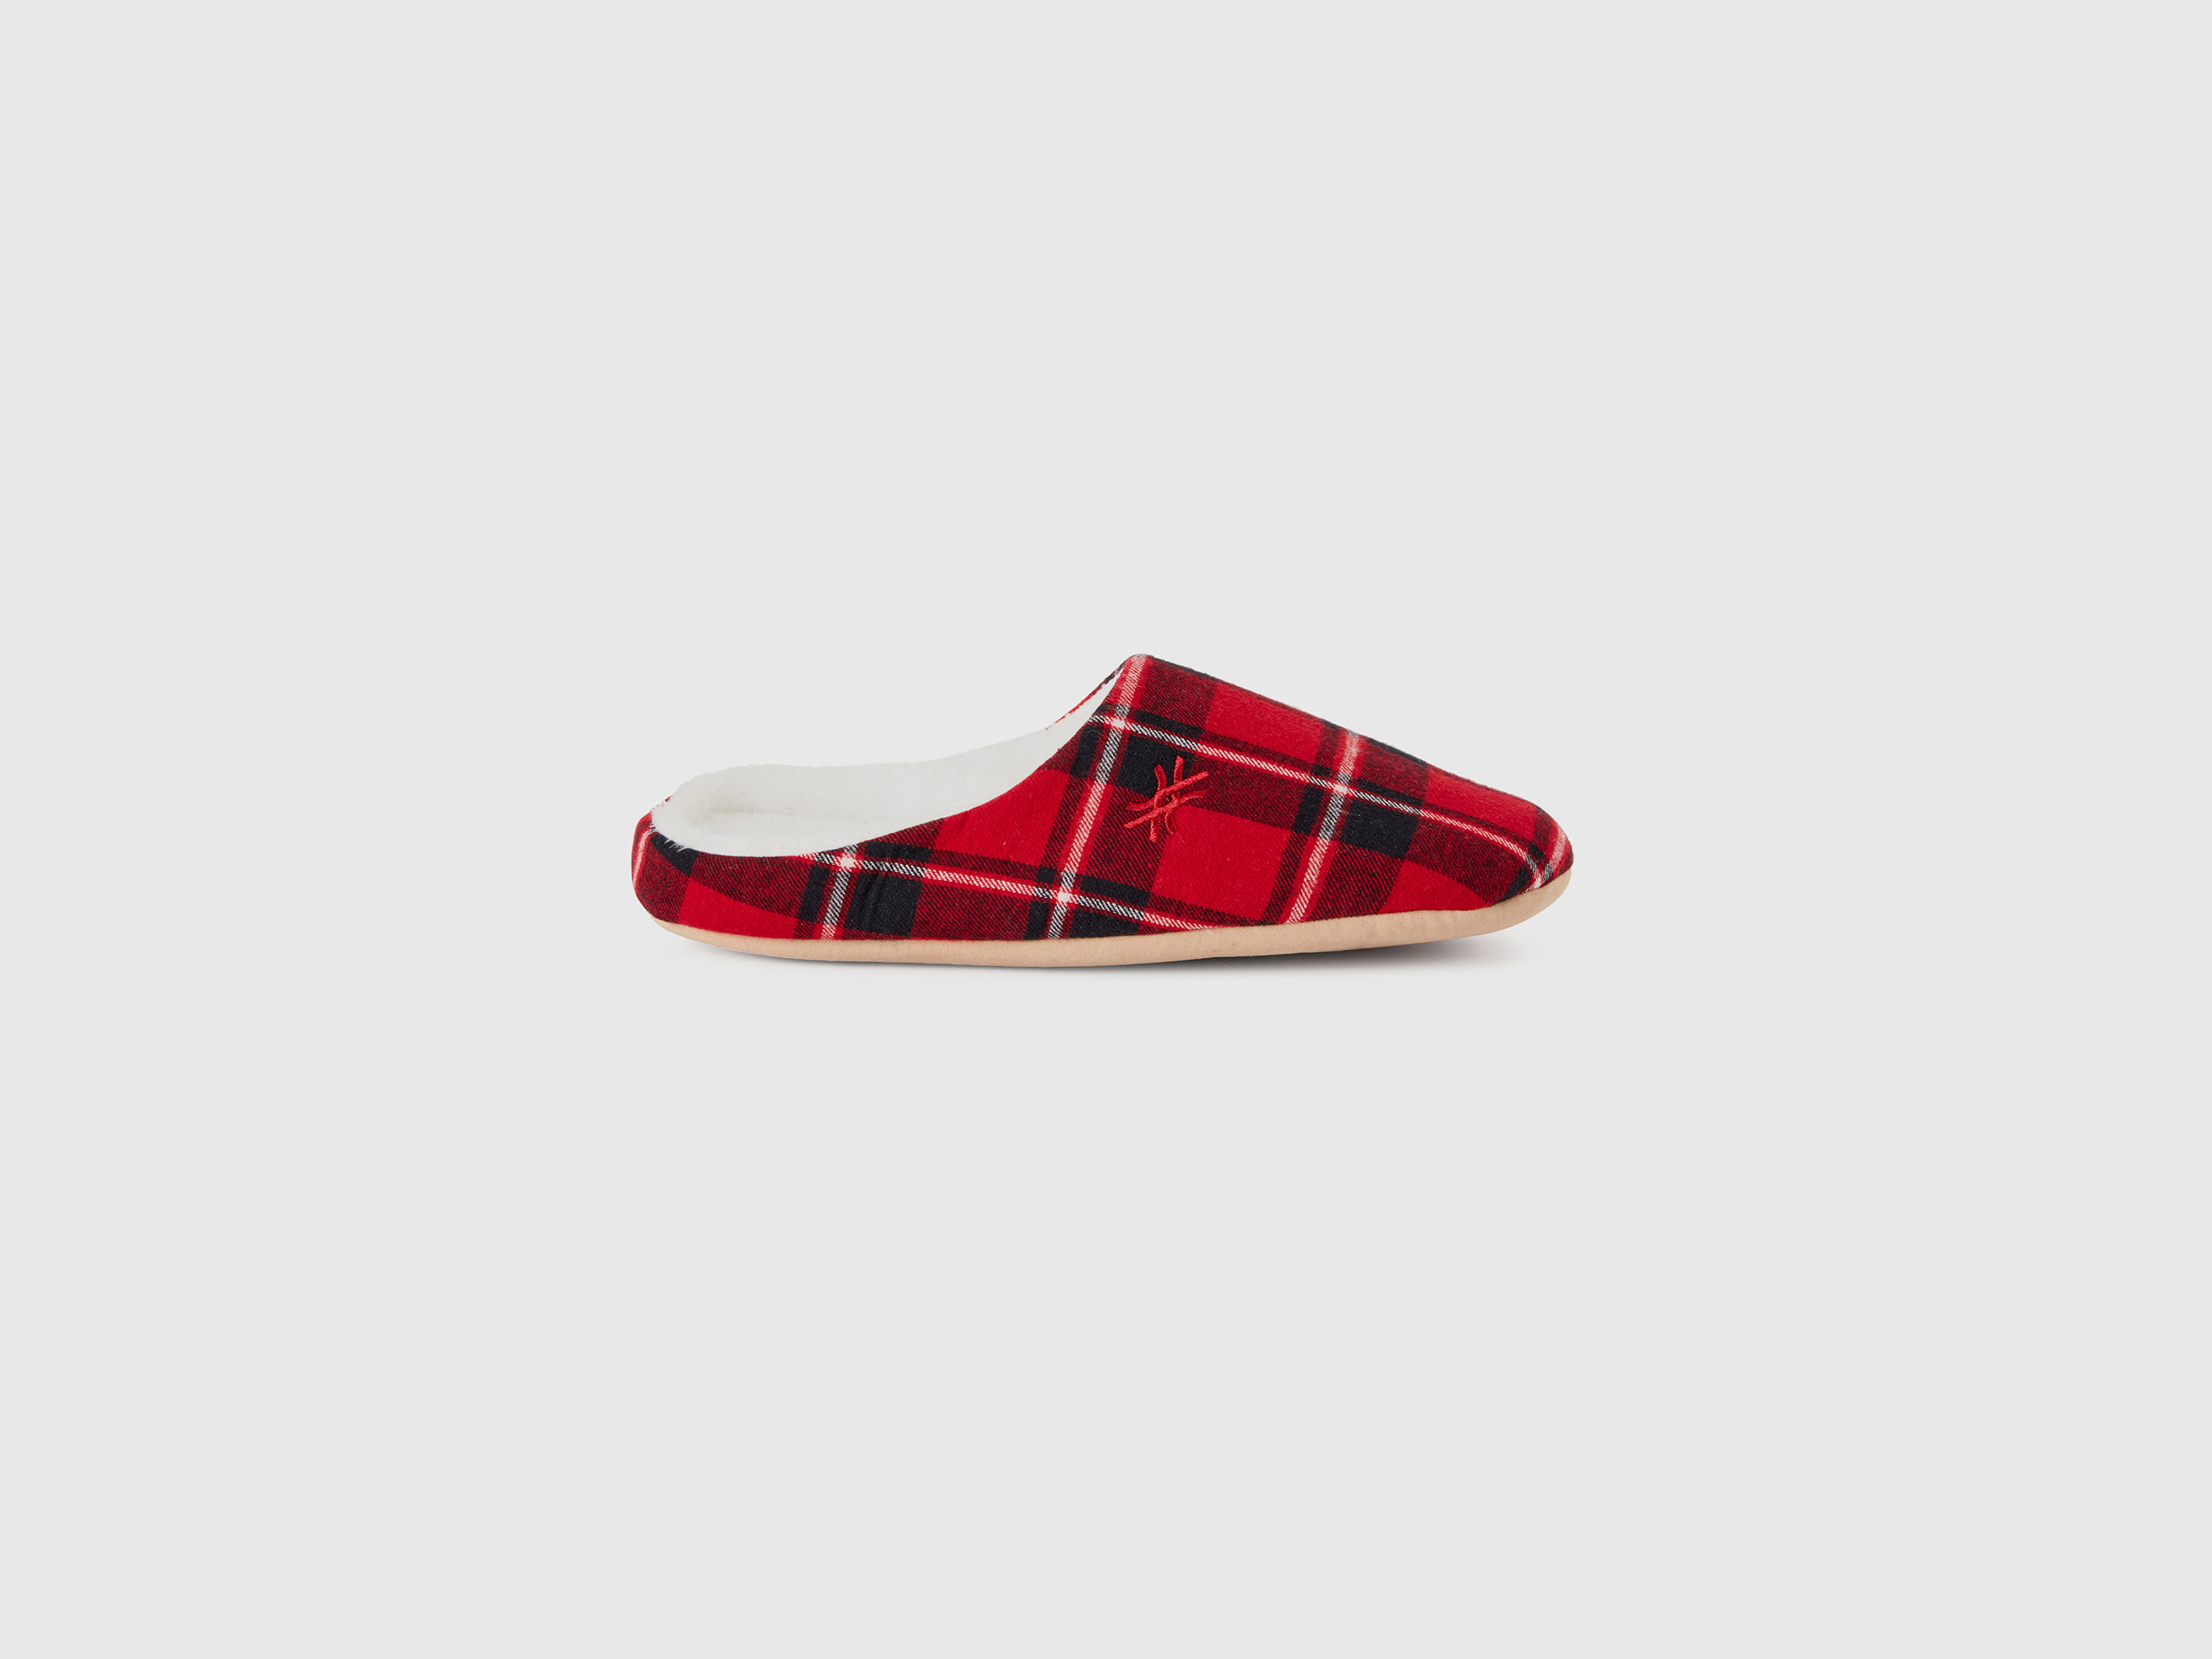 benetton, chaussons tartan, taille 38-39, rouge, femme